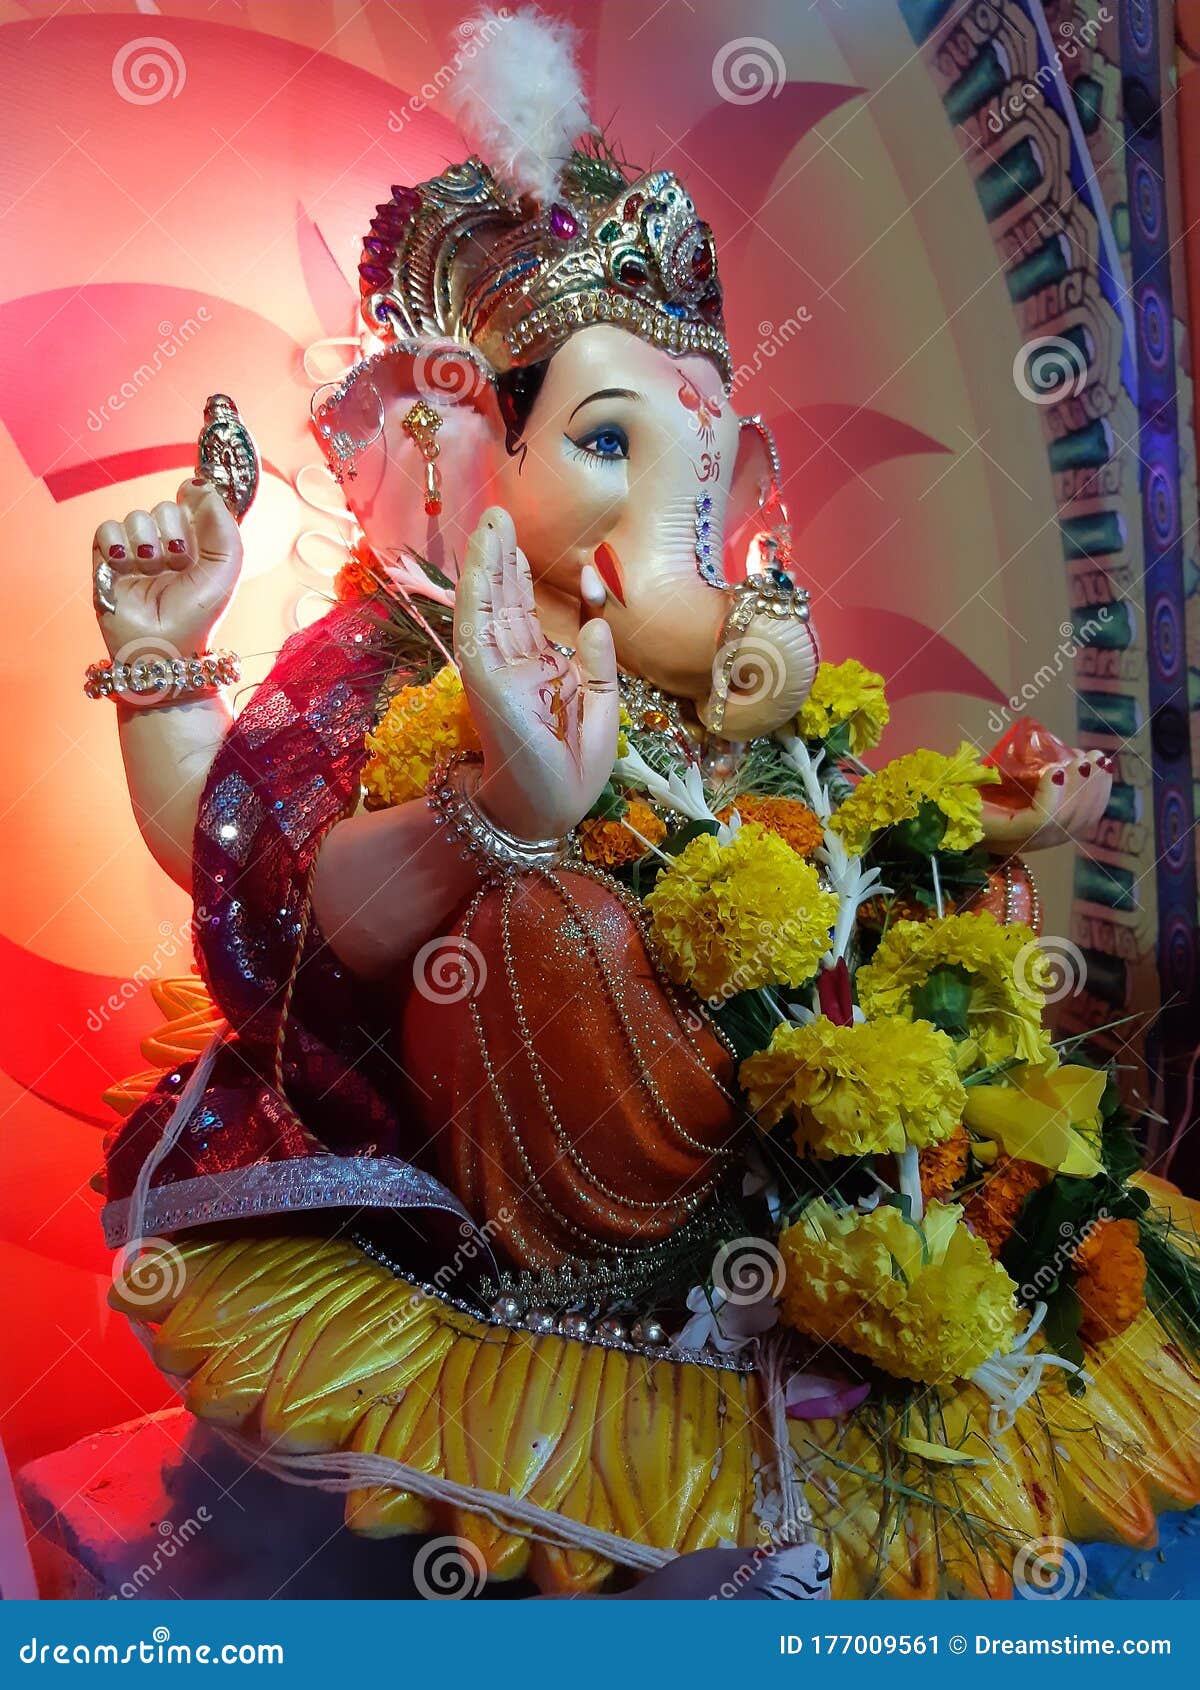 This a Photo of Lord Shree Ganesh Stock Image - Image of lord, shri ...